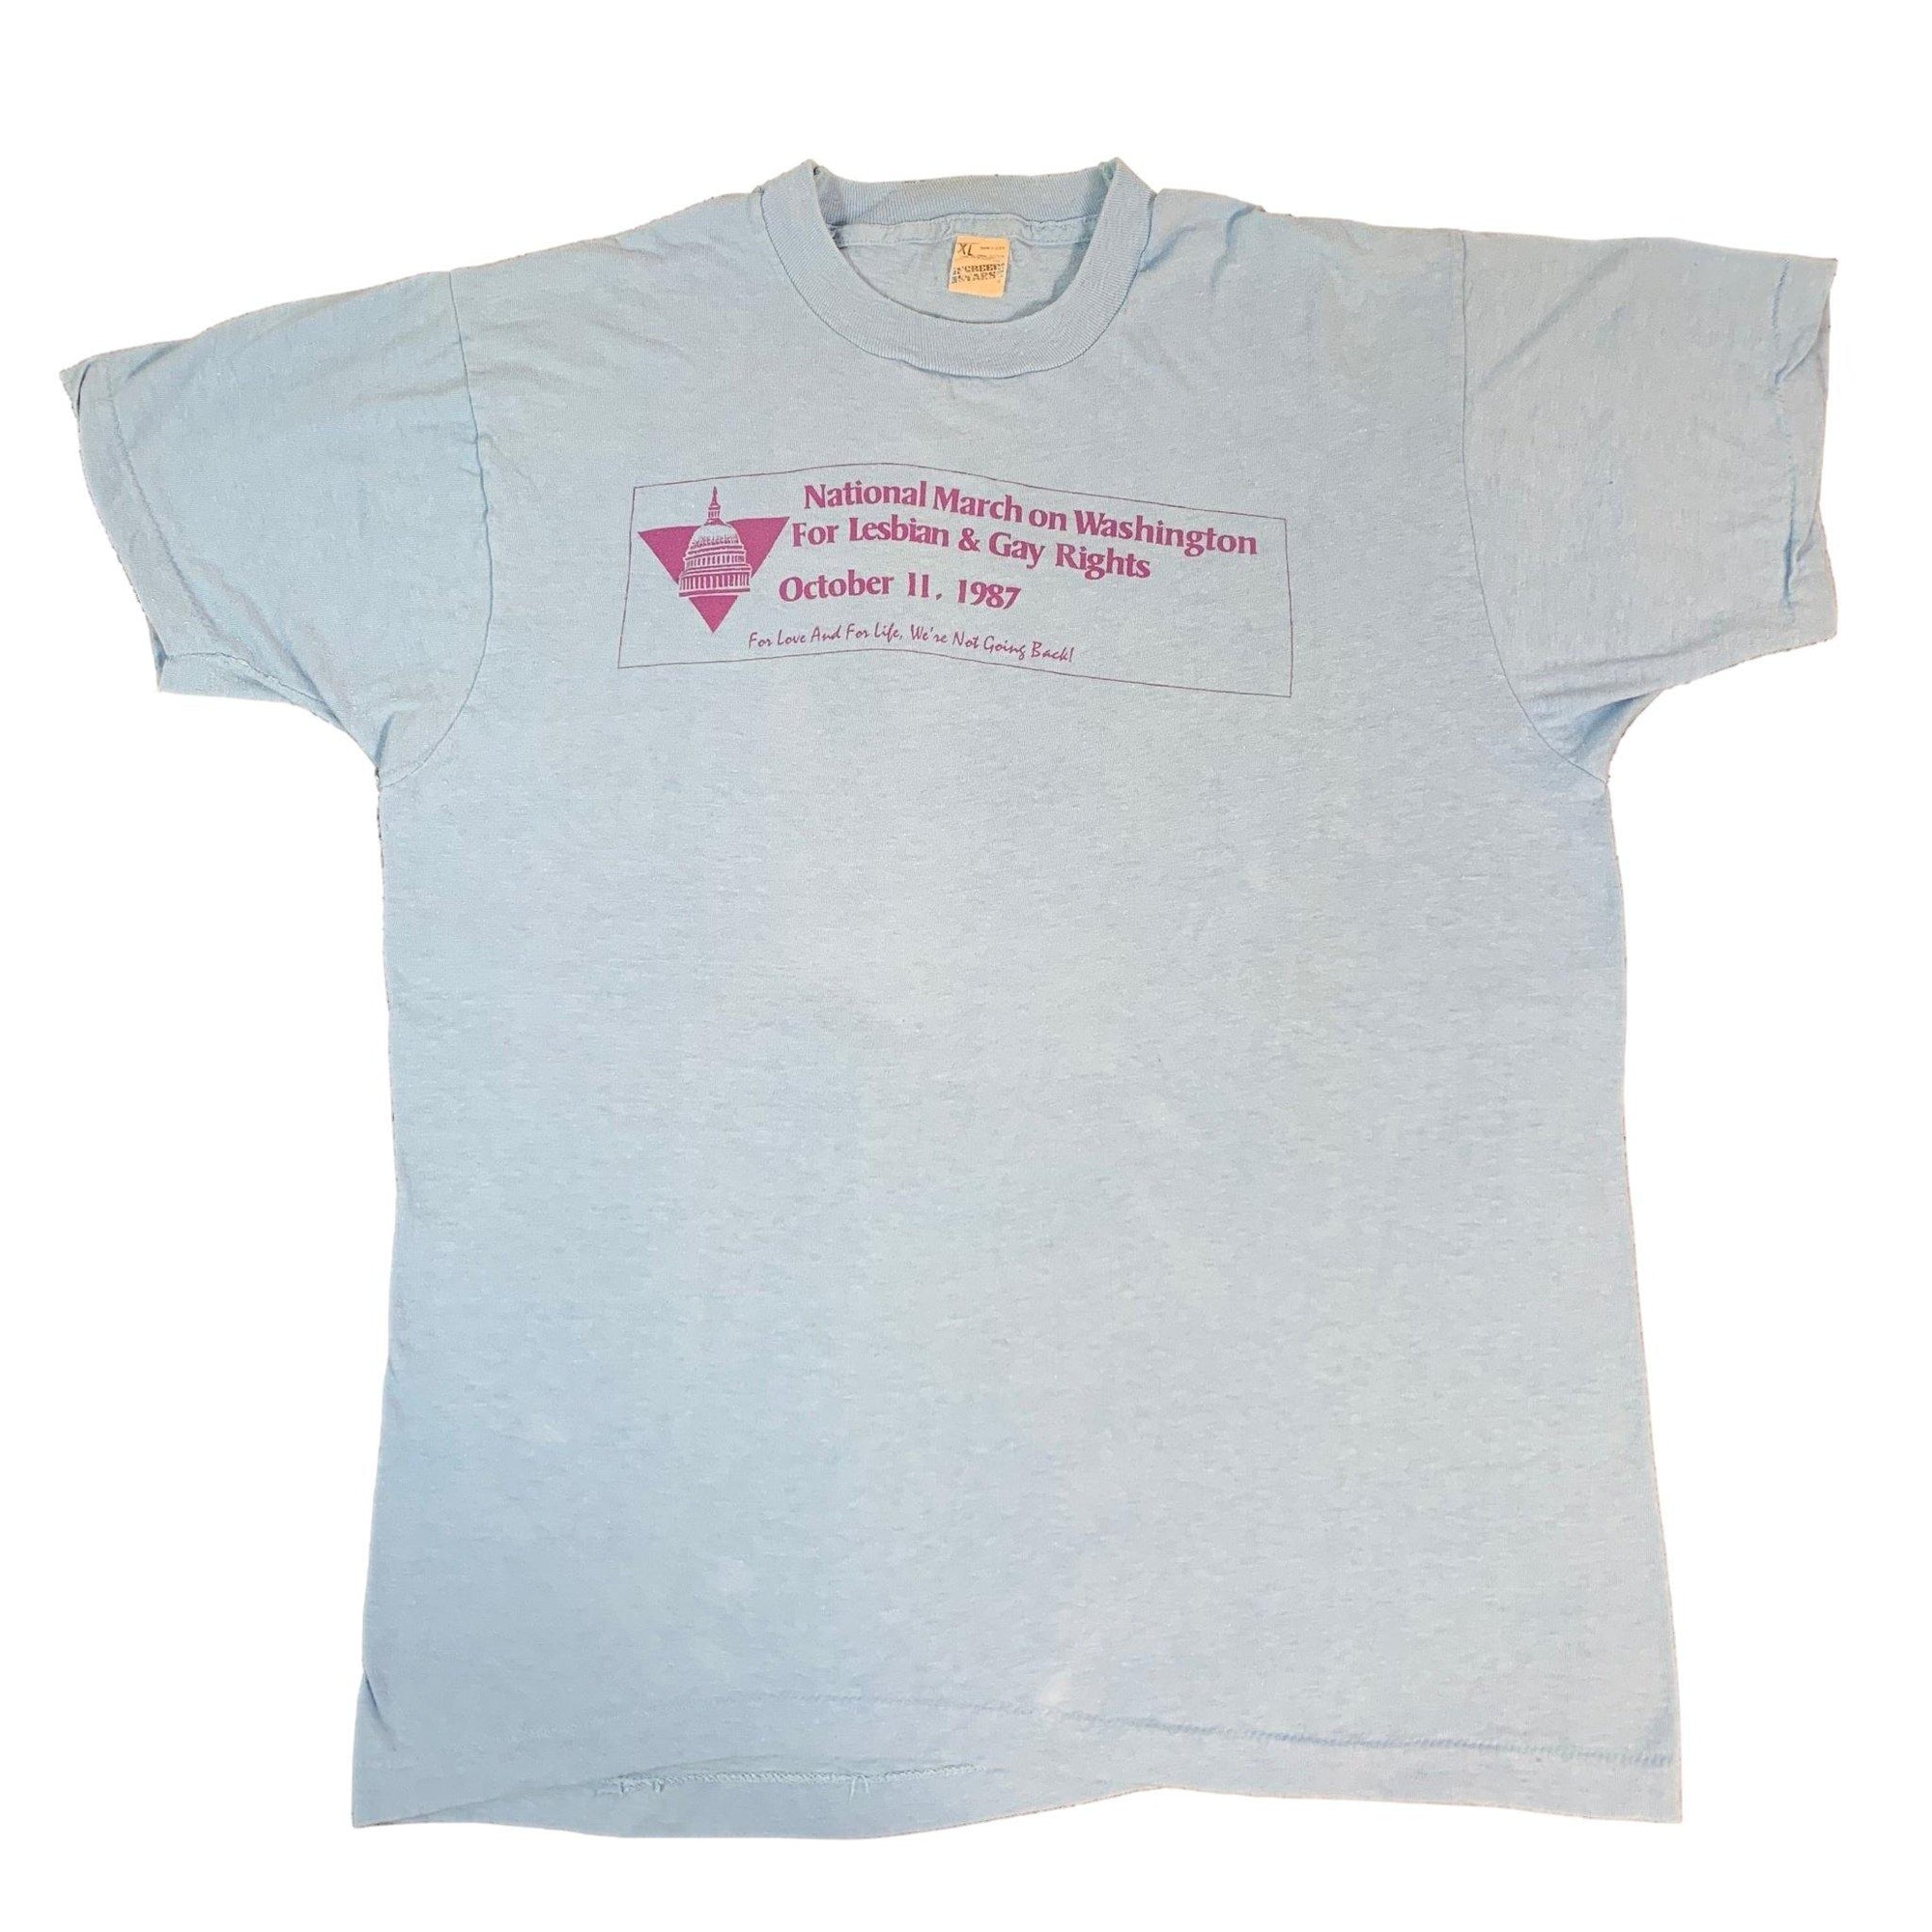 Vintage March For Lesbian & Gay Rights "1987" T-Shirt - jointcustodydc